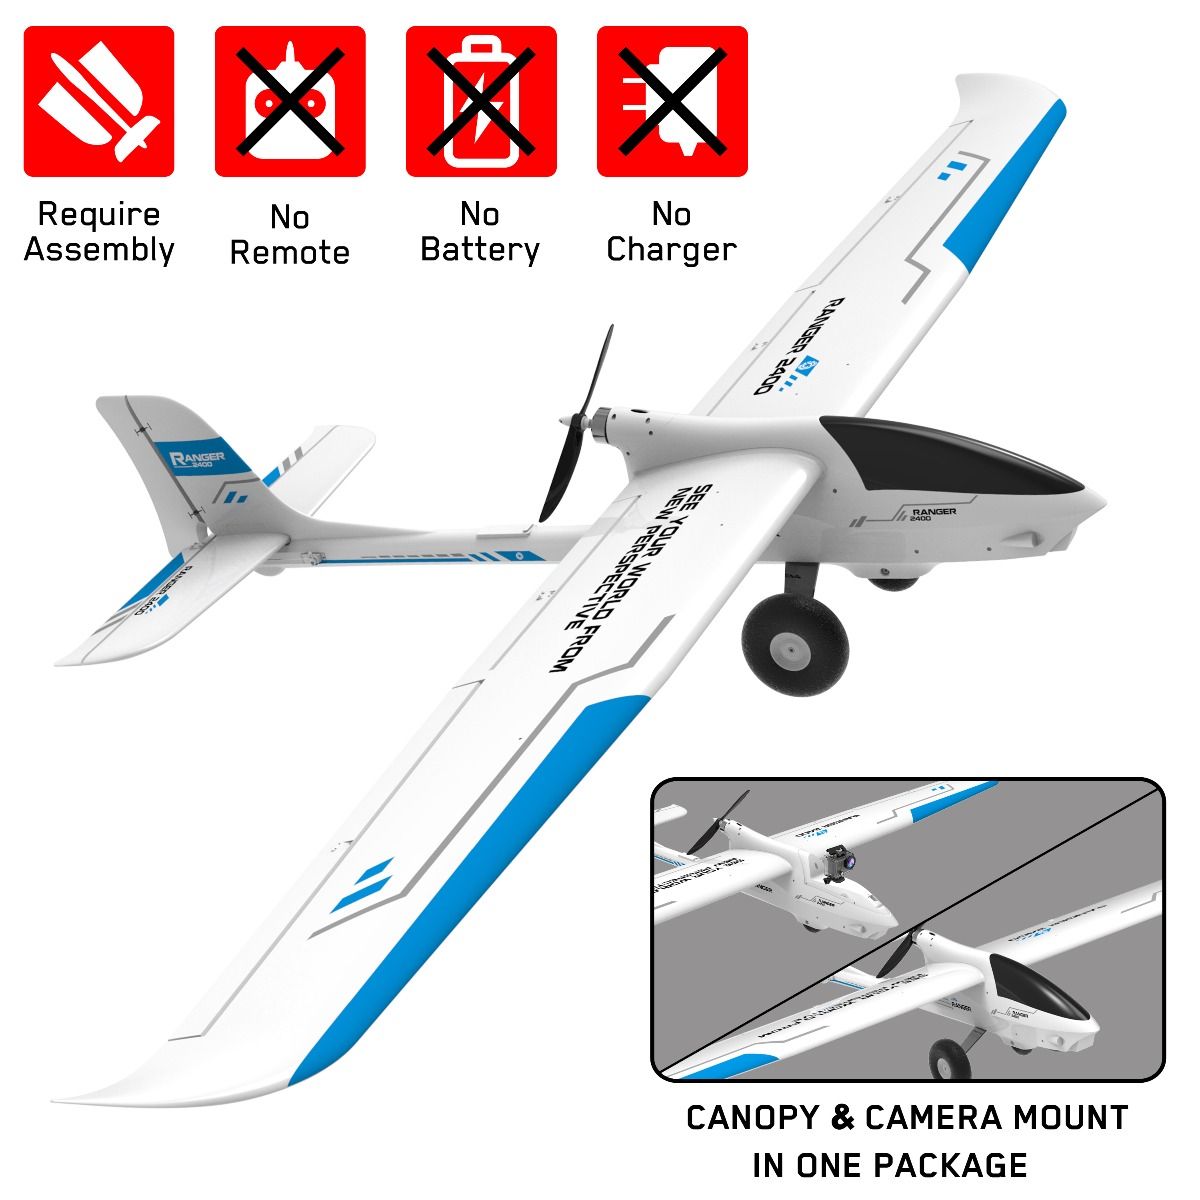 http://cdn.shopify.com/s/files/1/0590/1339/8677/products/ranger-2400-5-channel-fpv-airplane-with-24-meter-wingspan-and-multiple-camera-mounting-platform-757-9-pnpyvpA_1200x1200.jpg?v=1635364606